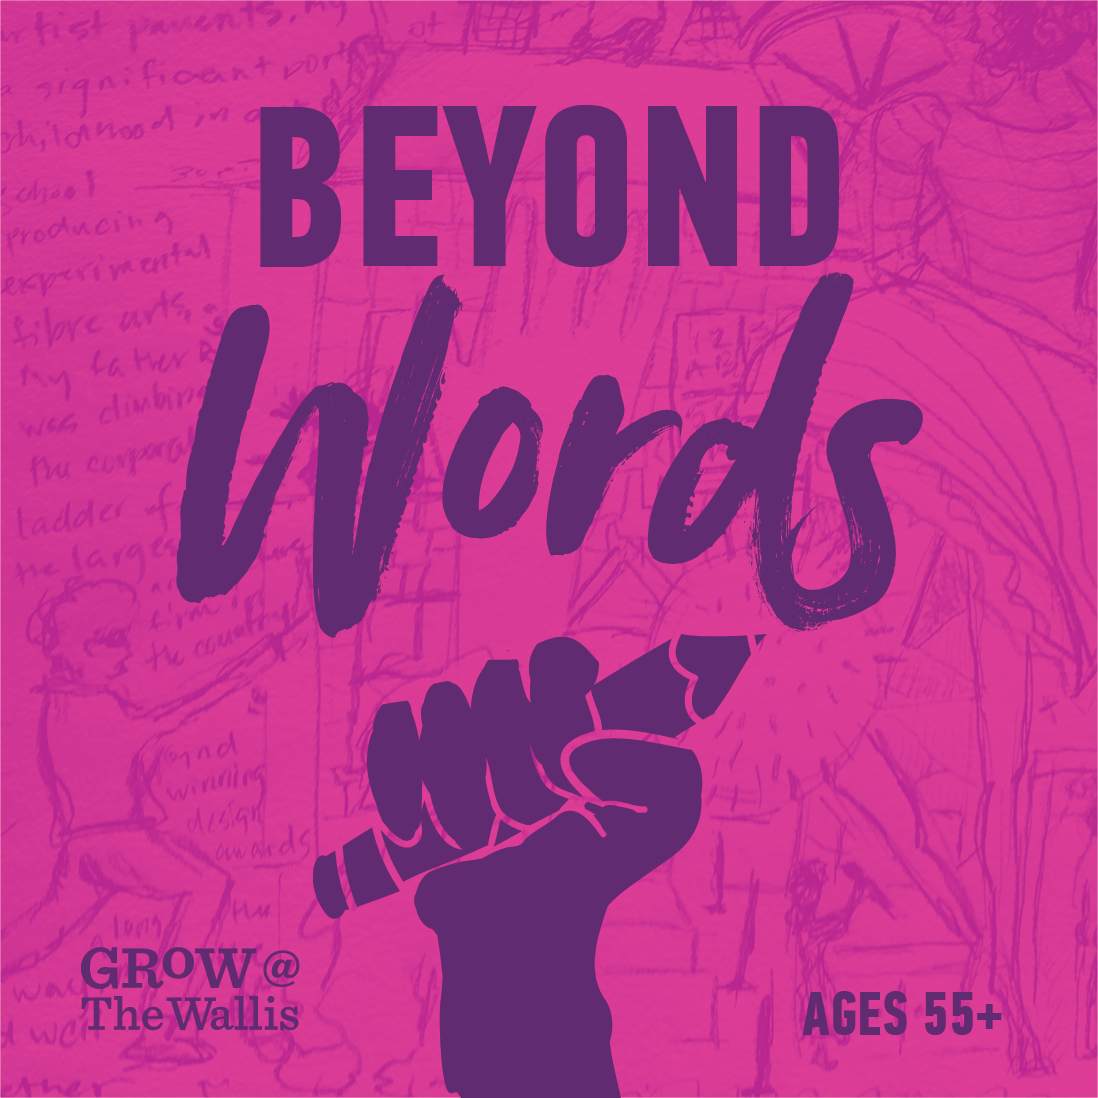 BEYOND WORDS: A Virtual Course for Older Adults